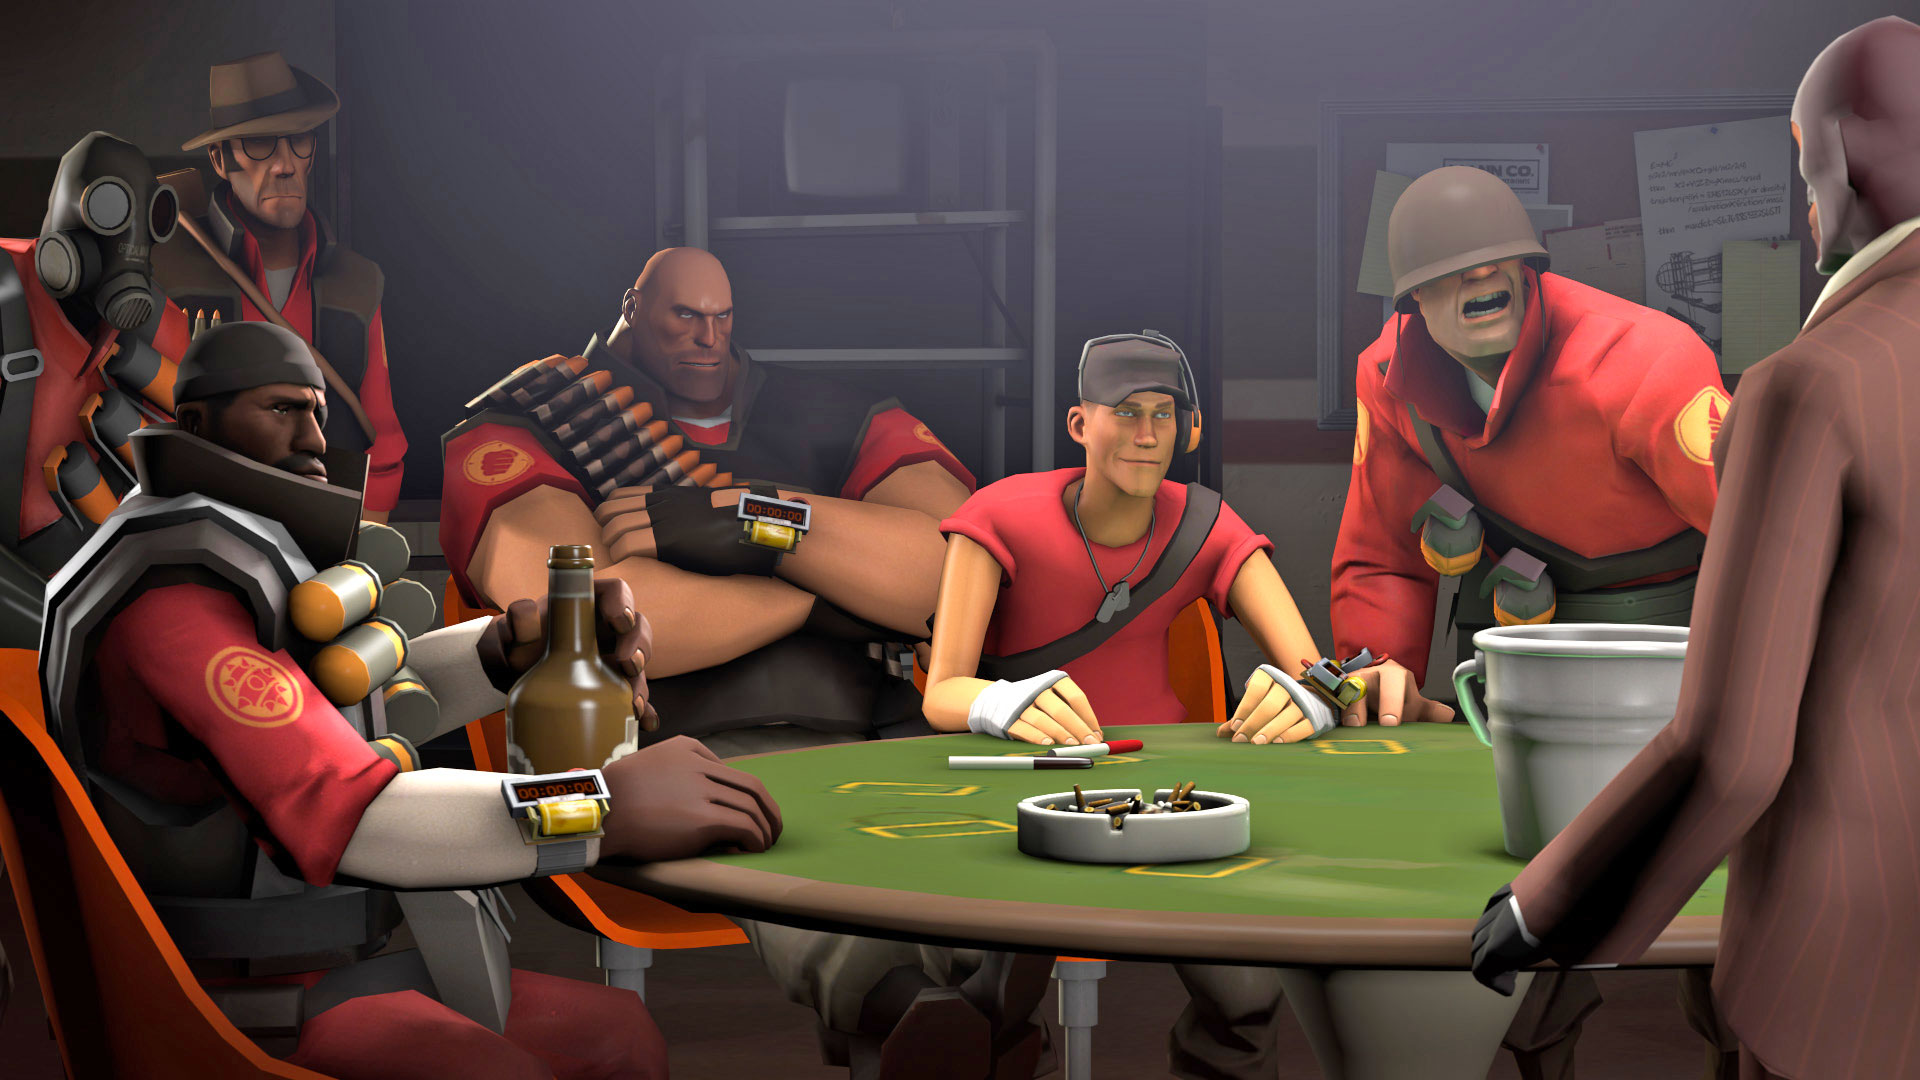 Team Fortress 2 #22